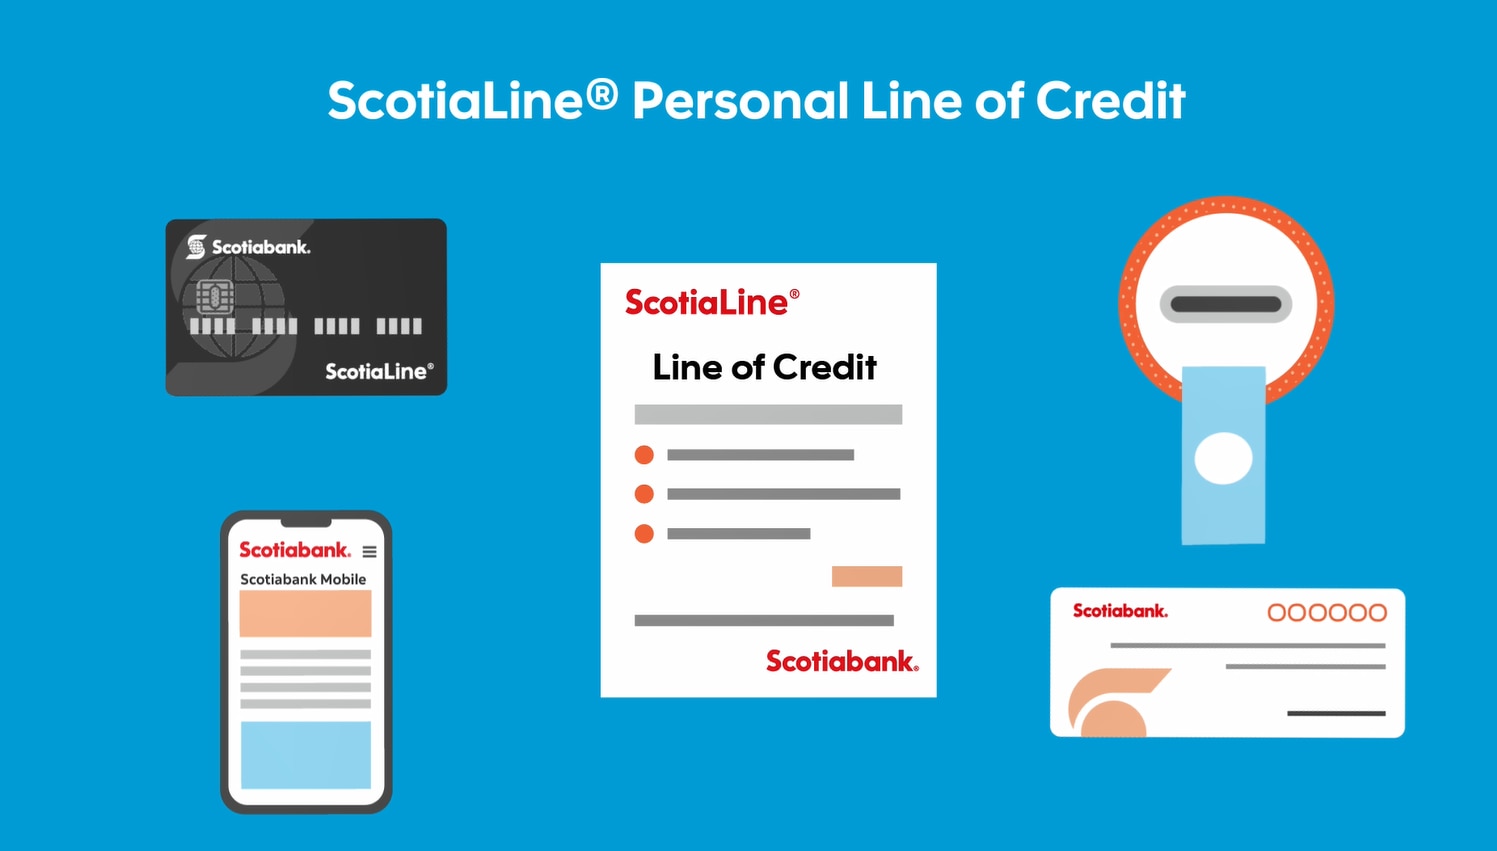 Whatch video How to use and access your line of credit  